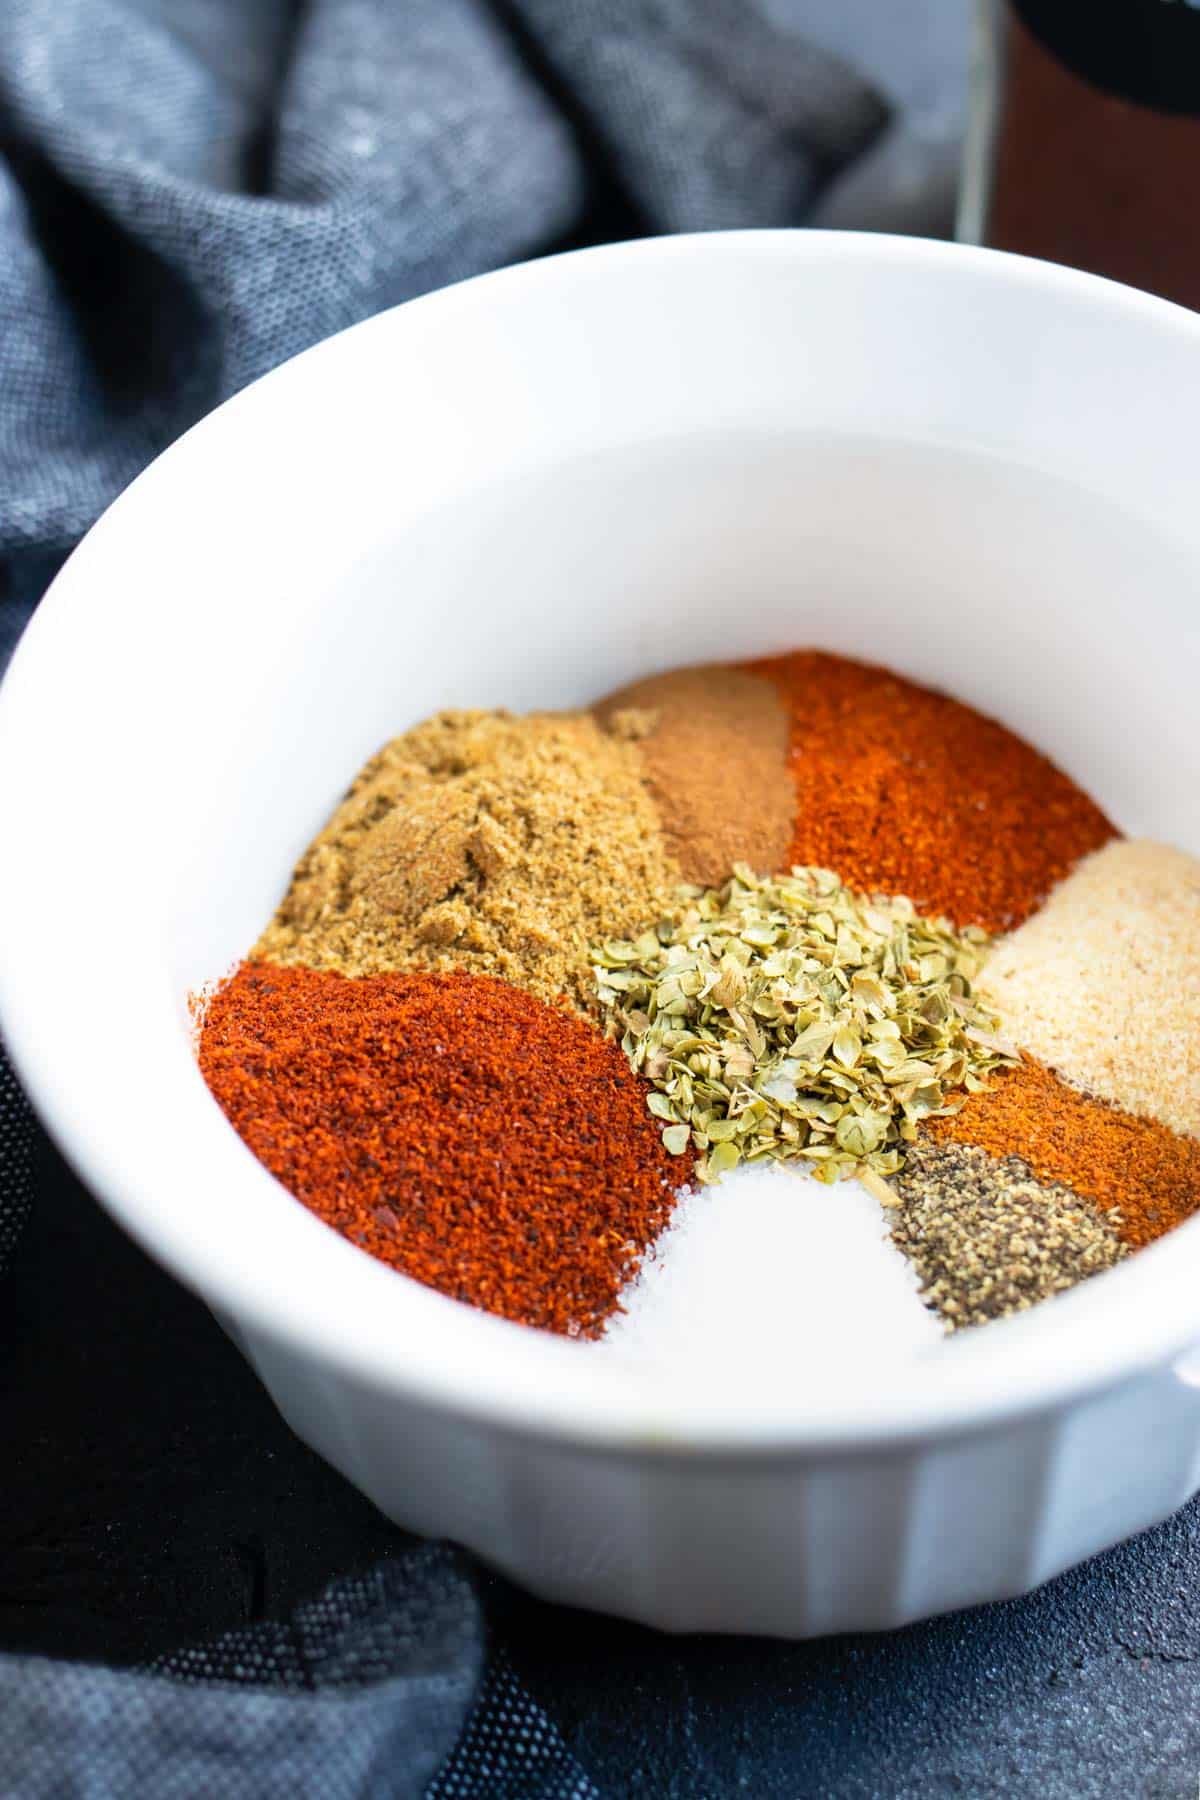 Spices in a white bowl showing how to make homemade chili seasoning.